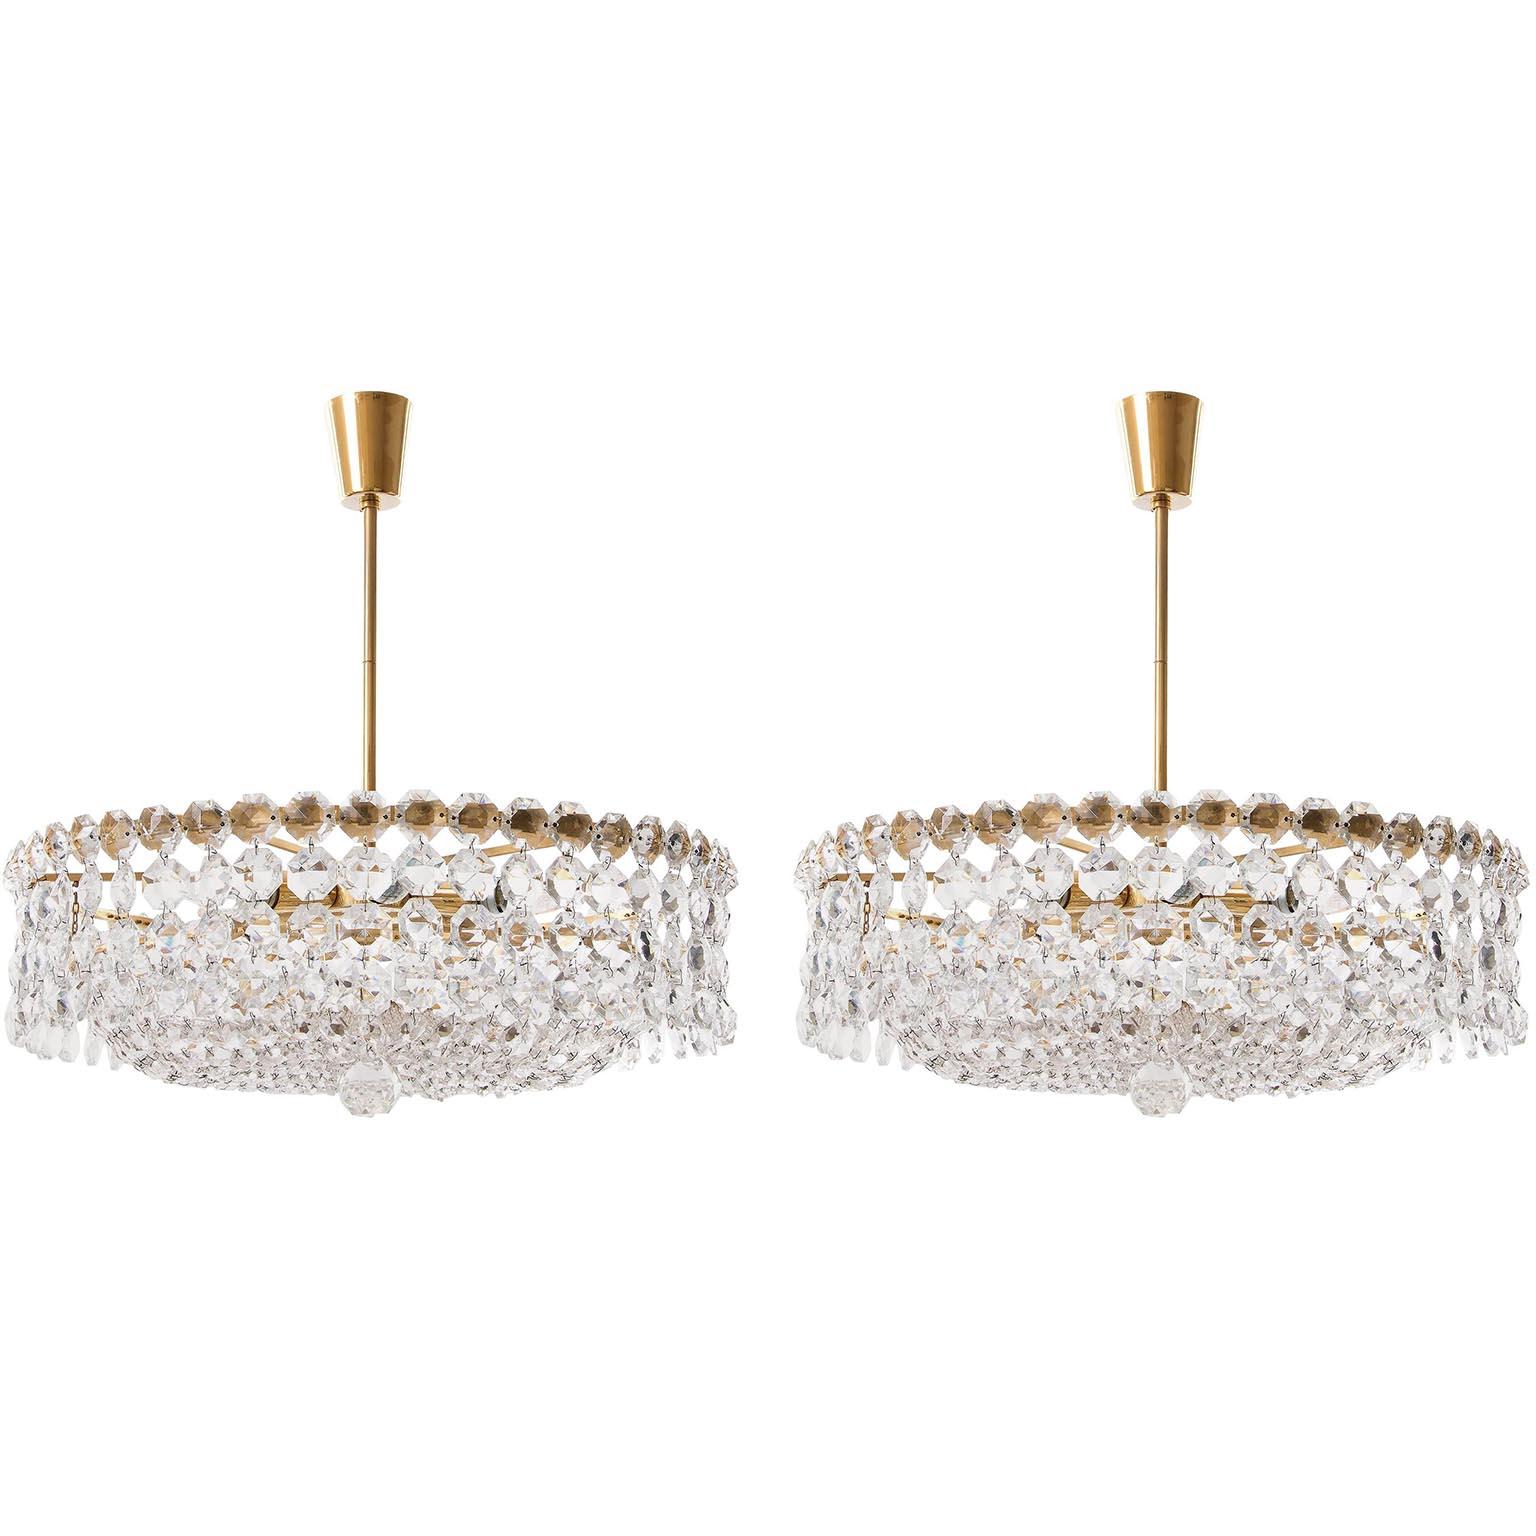 A pair of very exclusive and high quality pendant chandeliers by Bakalowits & Söhne, Austria, manufactured in midcentury, circa 1960.
Each chandelier is made of a gold-plated brass frame decorated with hundreds of faceted glass crystals.
Each light